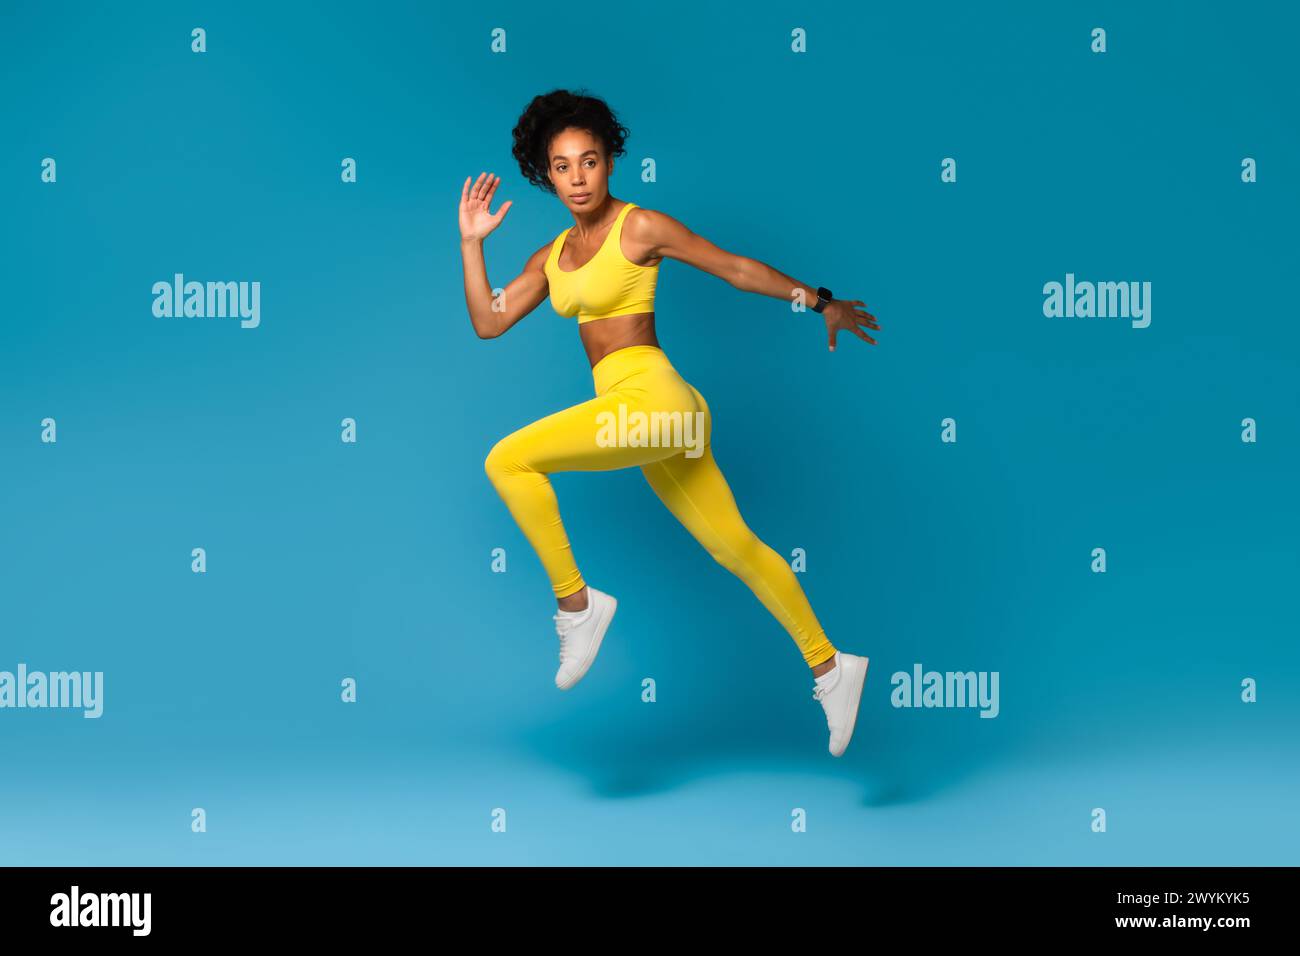 Athlete captured mid-air in yellow sportswear on blue background Stock Photo